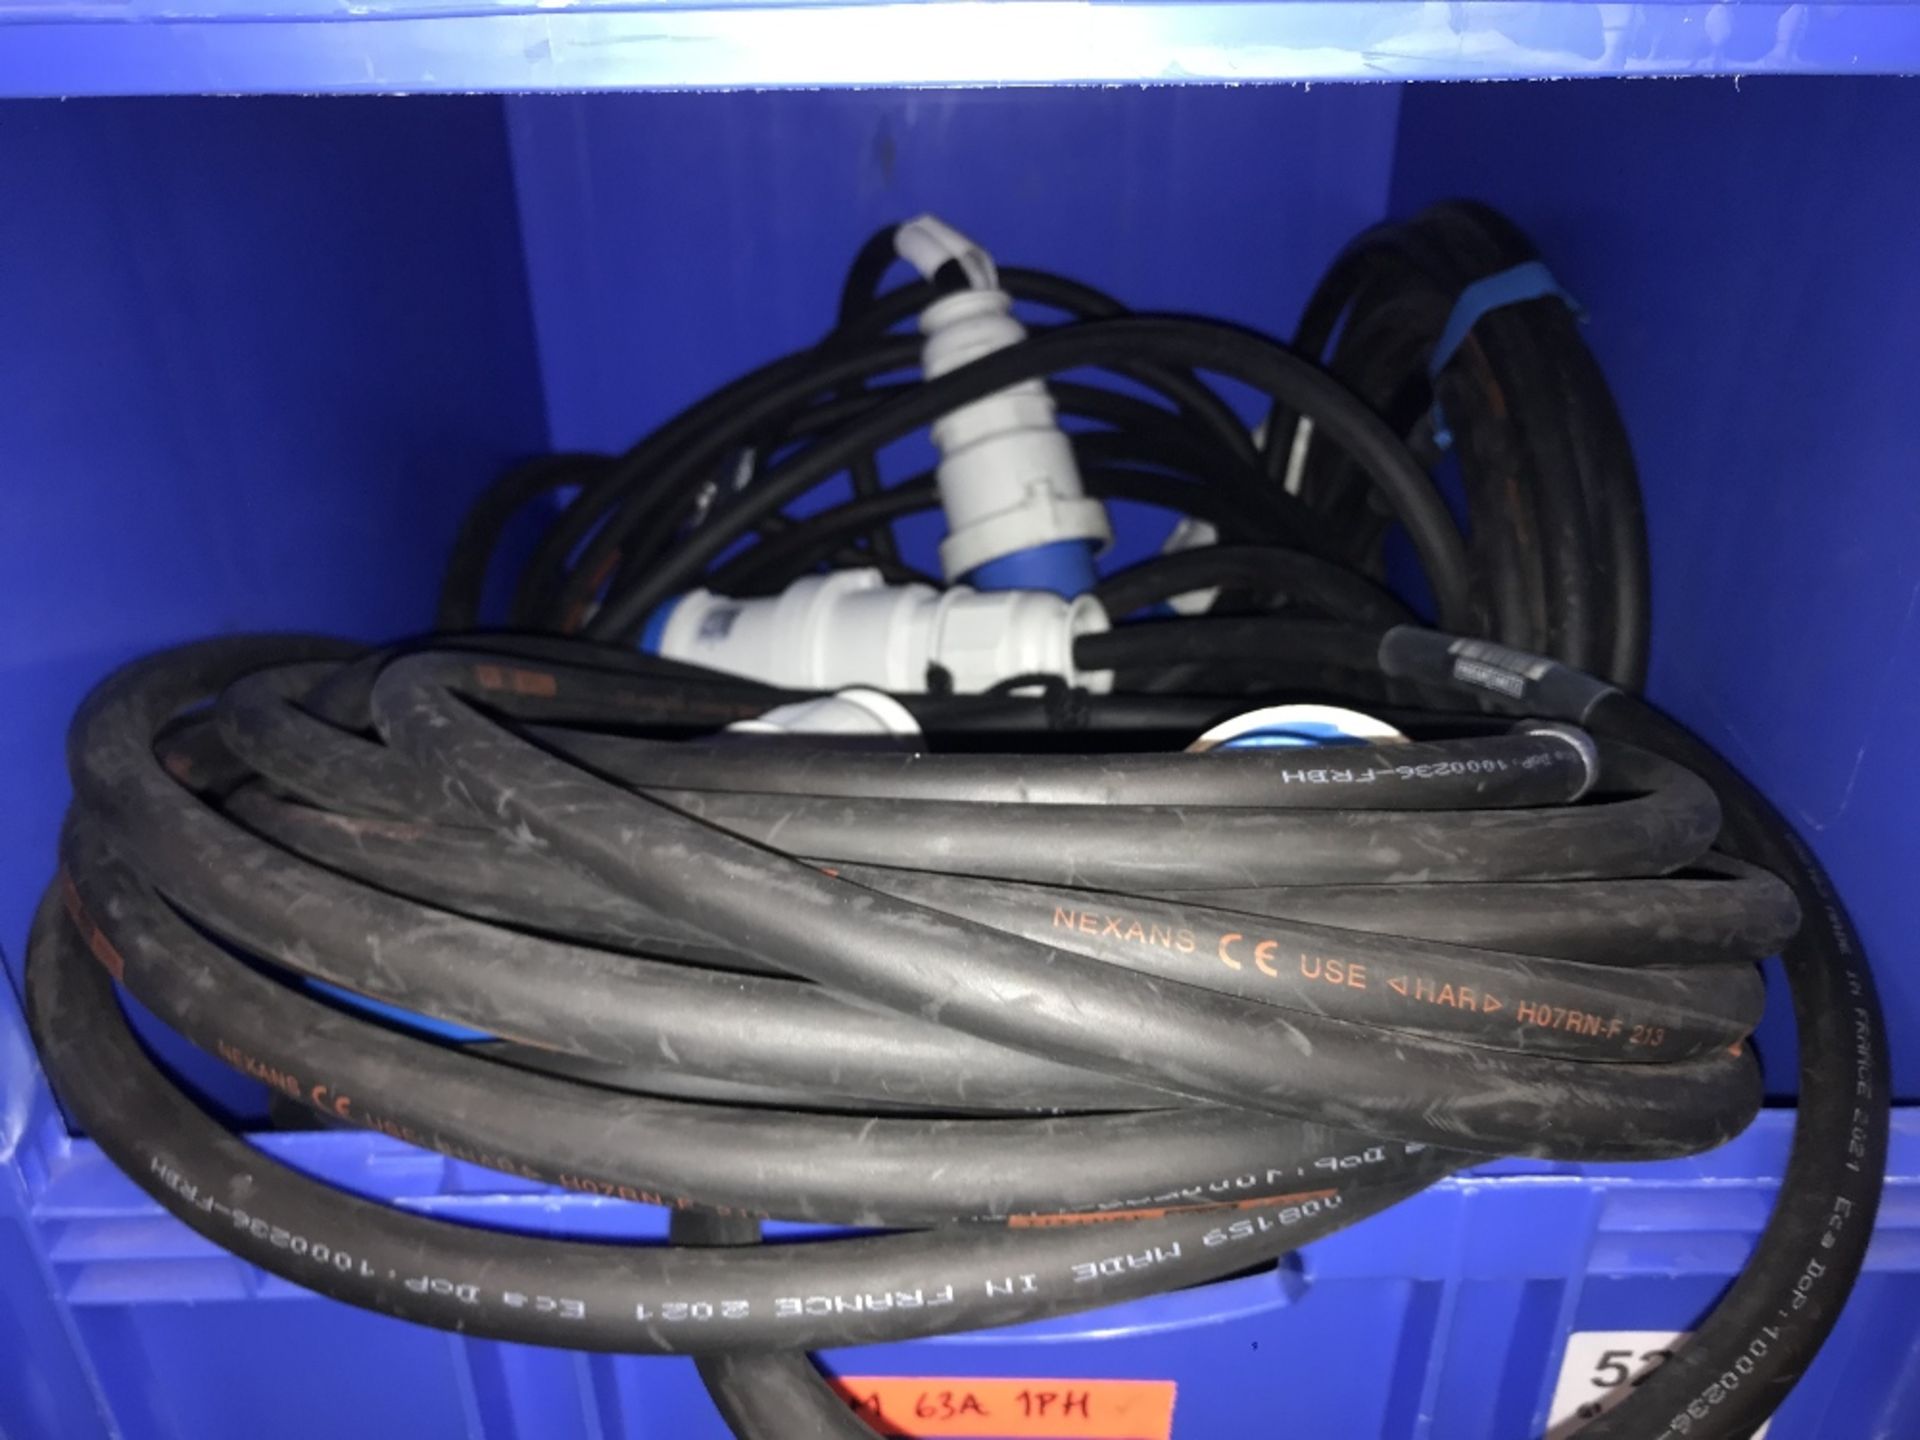 Quantity of 8m 63A 1PH Extension Cables - Image 2 of 2